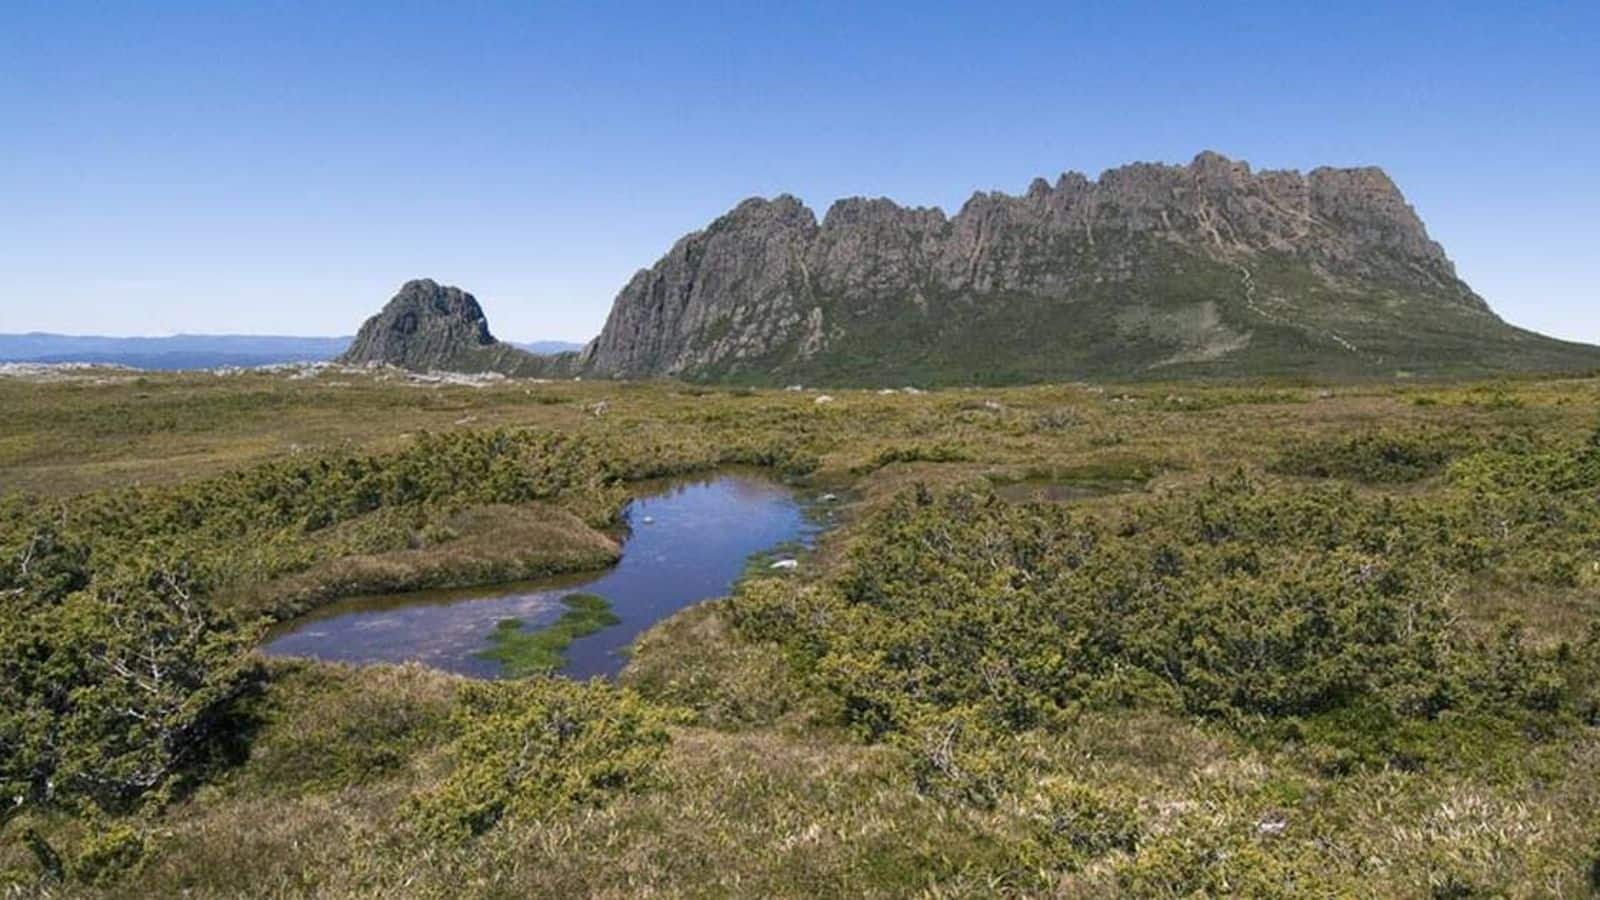 Take a journey though Tasmania's wilderness and heritage discovery route